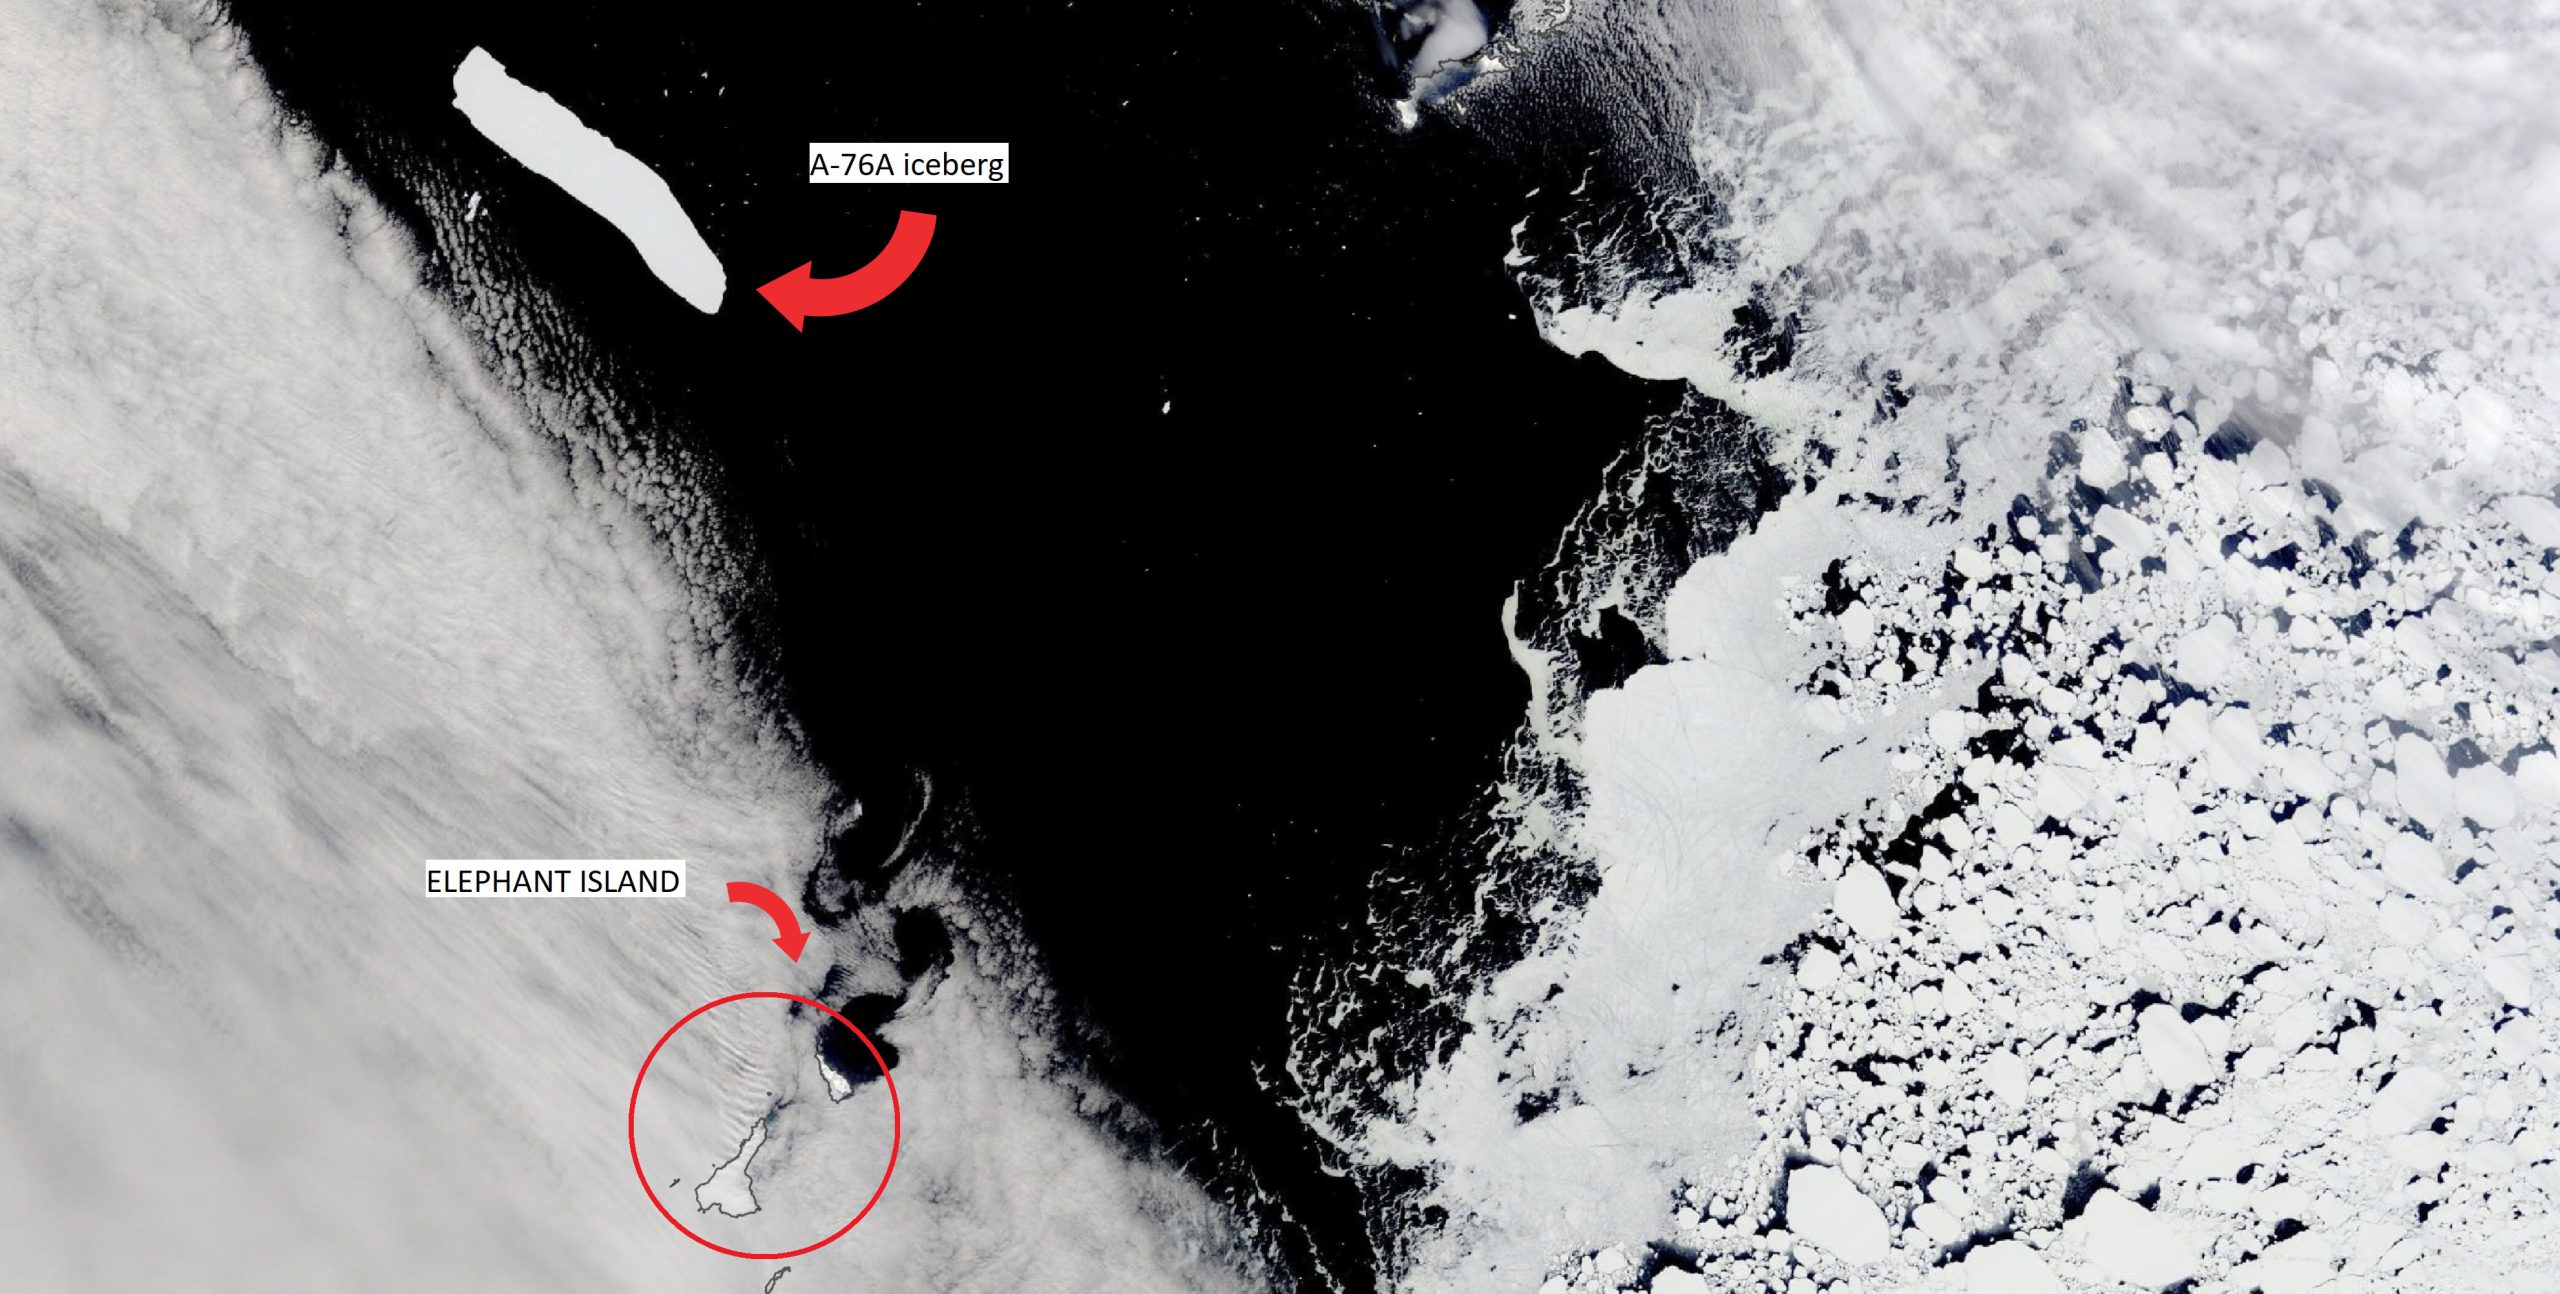 A satellite image showing the iceberg and island with annotations. Image Credit: NASA Earth Observatory images by Lauren Dauphin, using MODIS data from NASA EOSDIS LANCE and GIBS/Worldview.